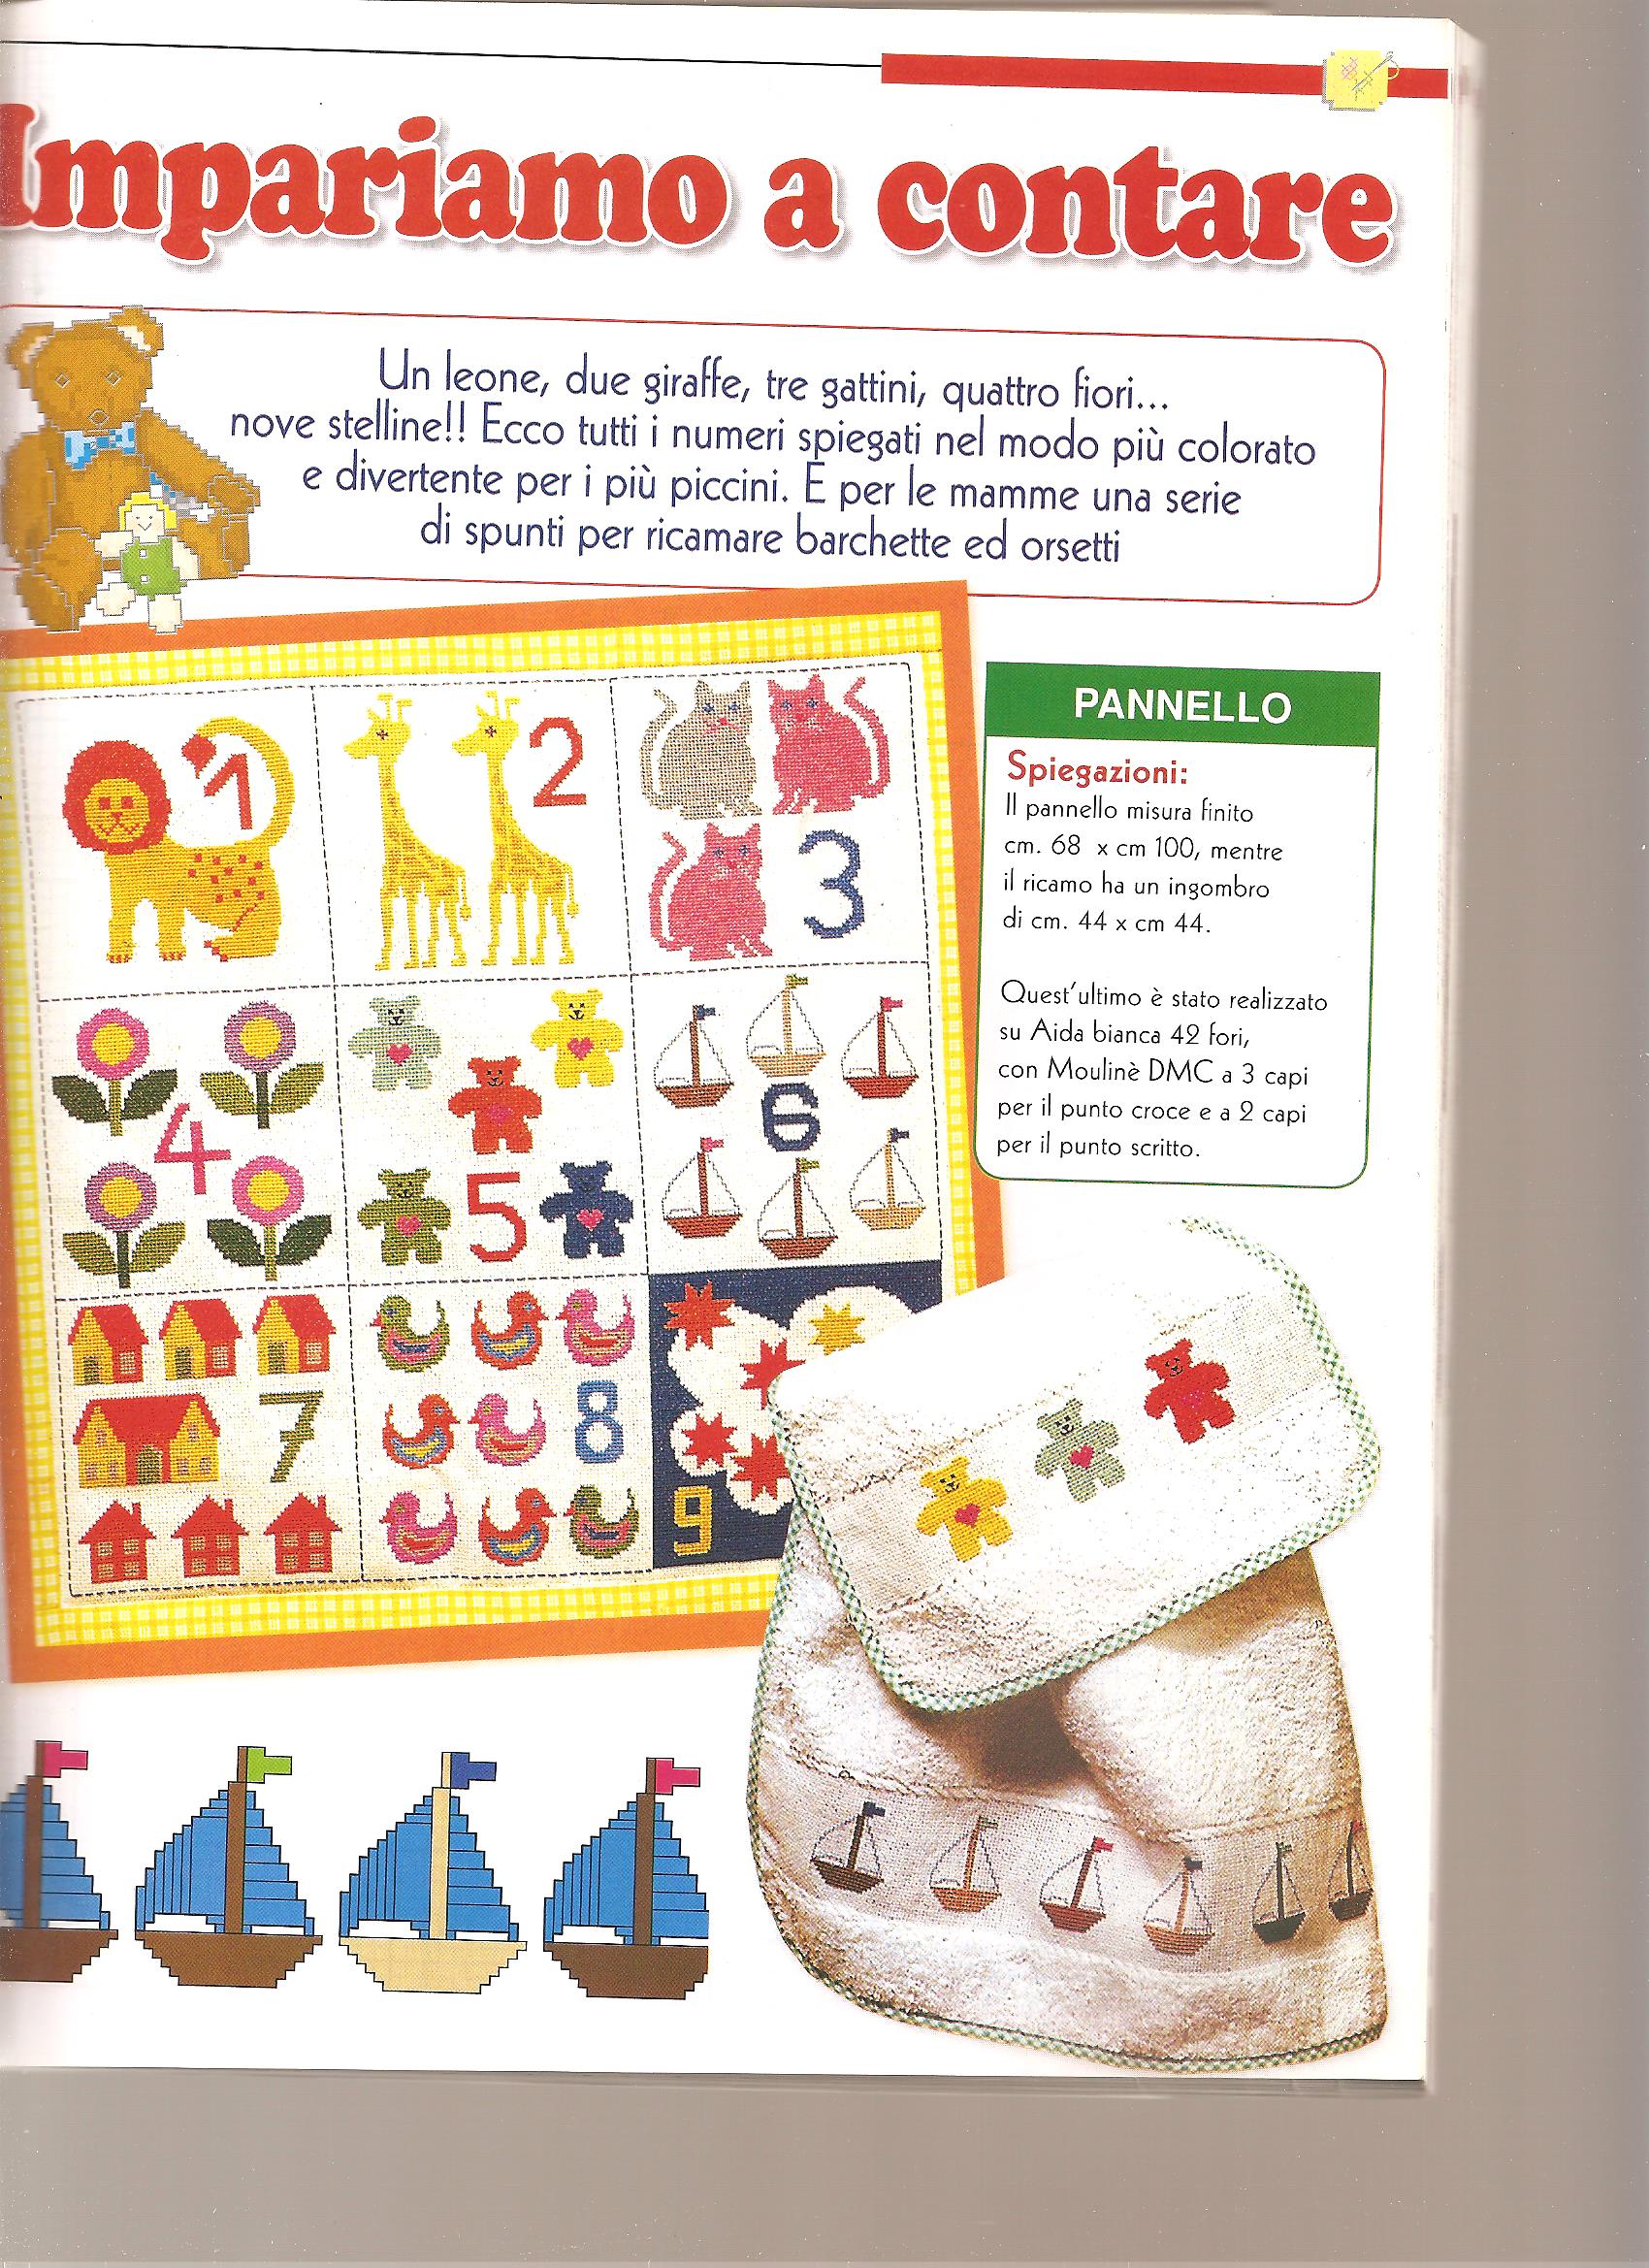 Cross stitch panel let’ s learn to count! (1)